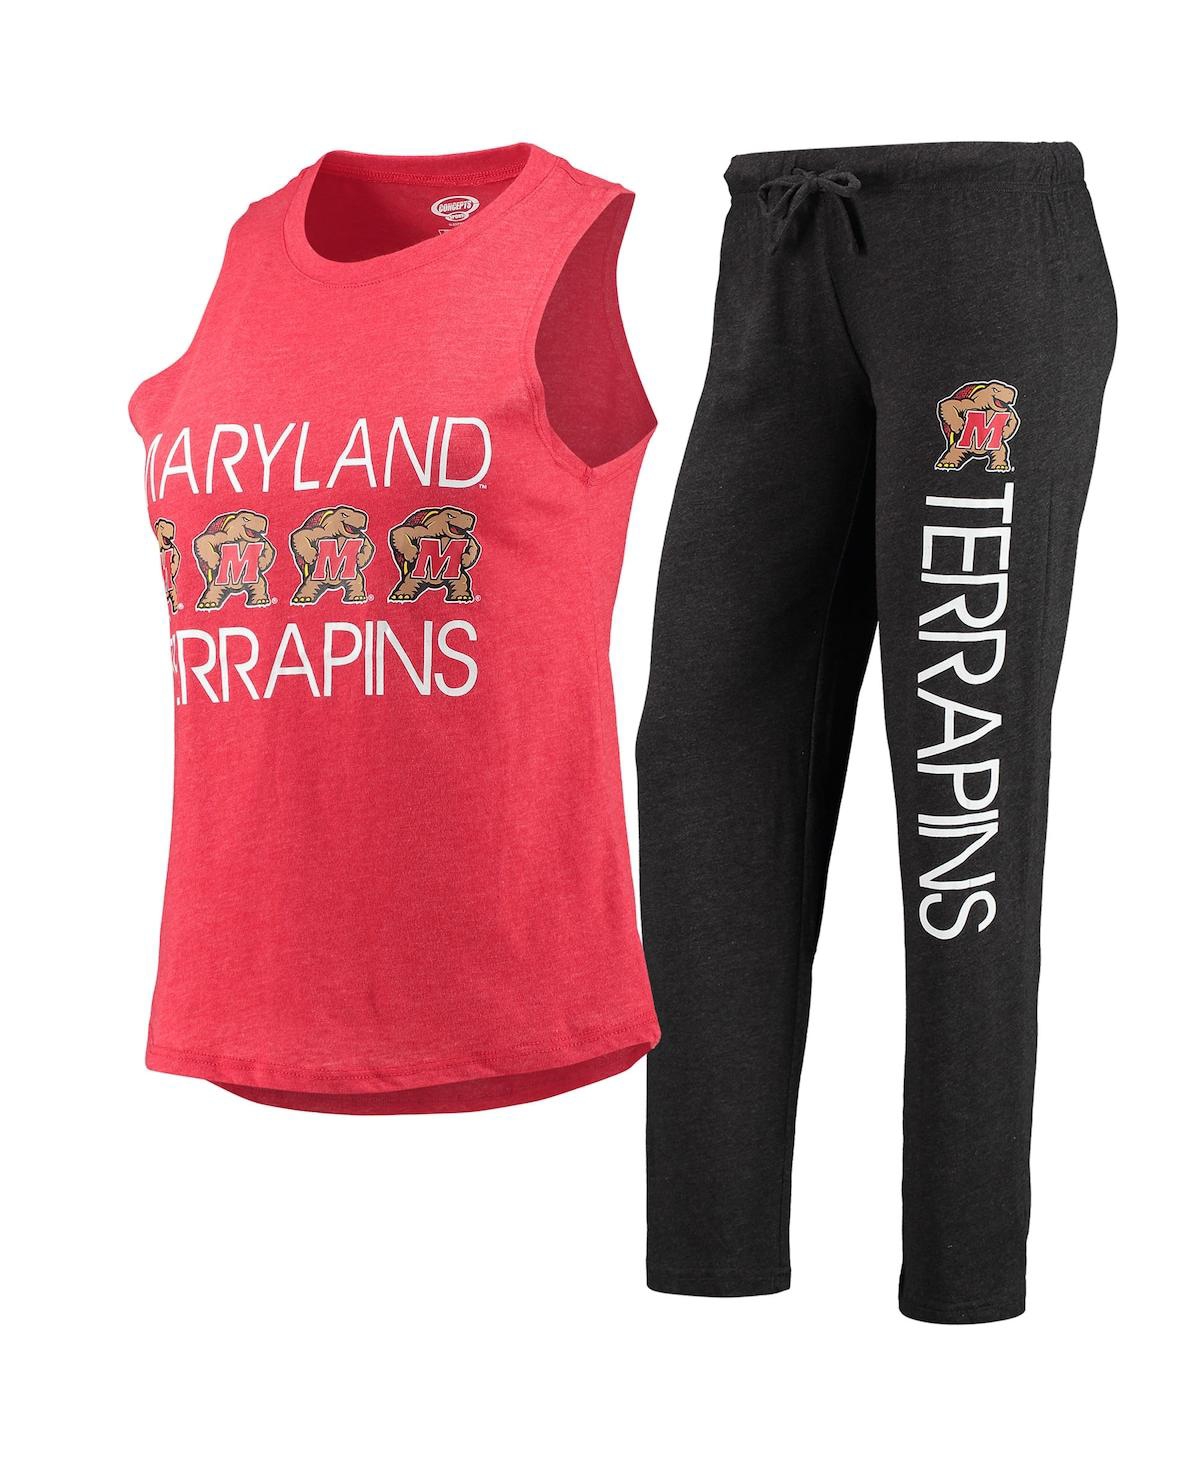 Women's Concepts Sport Black, Red Maryland Terrapins Tank Top and Pants Sleep Set - Black, Red